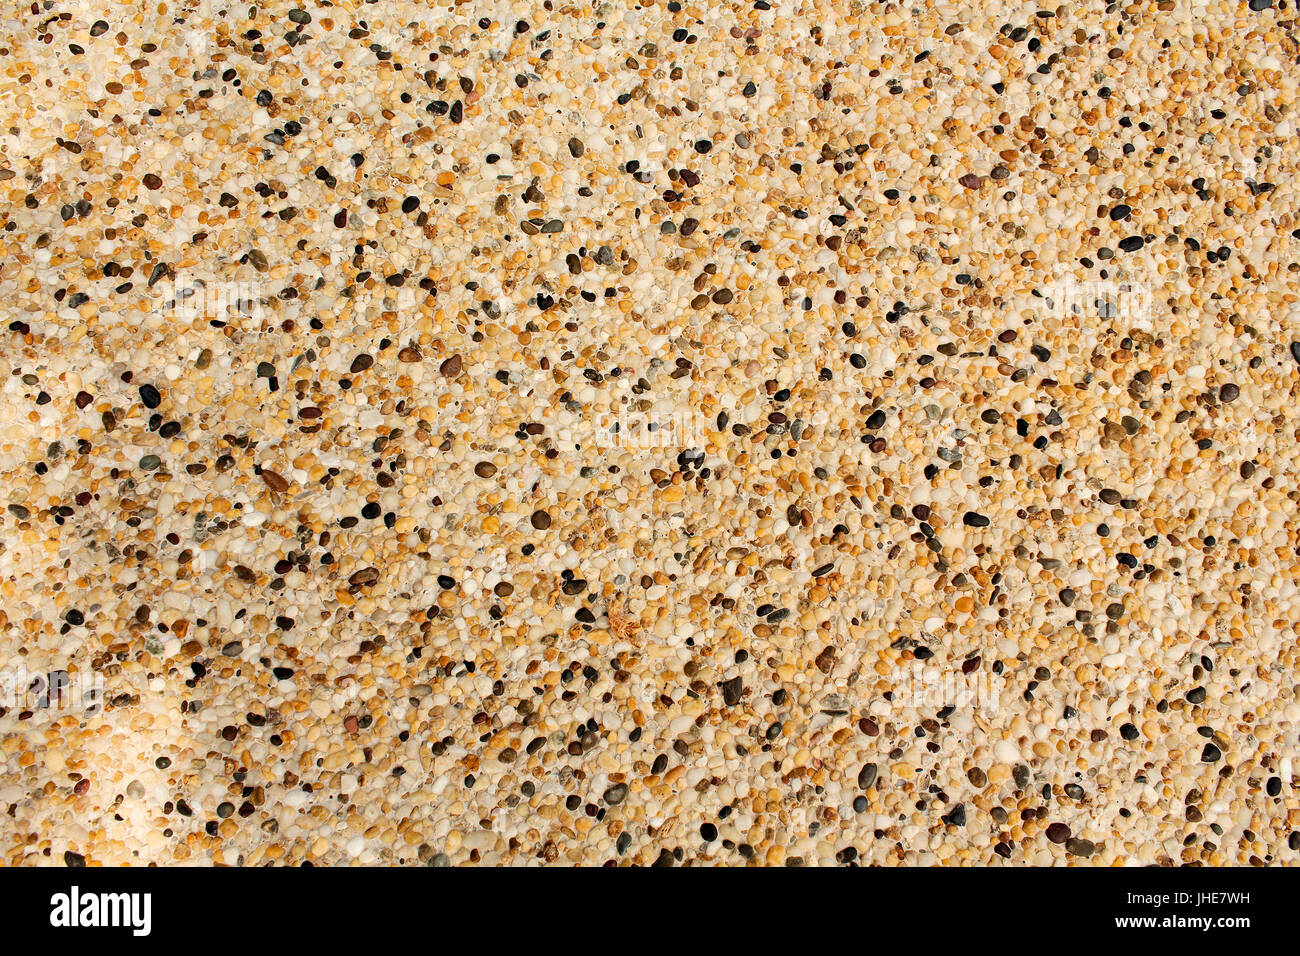 Concrete base with pebbles embedded known as Pebblecrete. Stock Photo